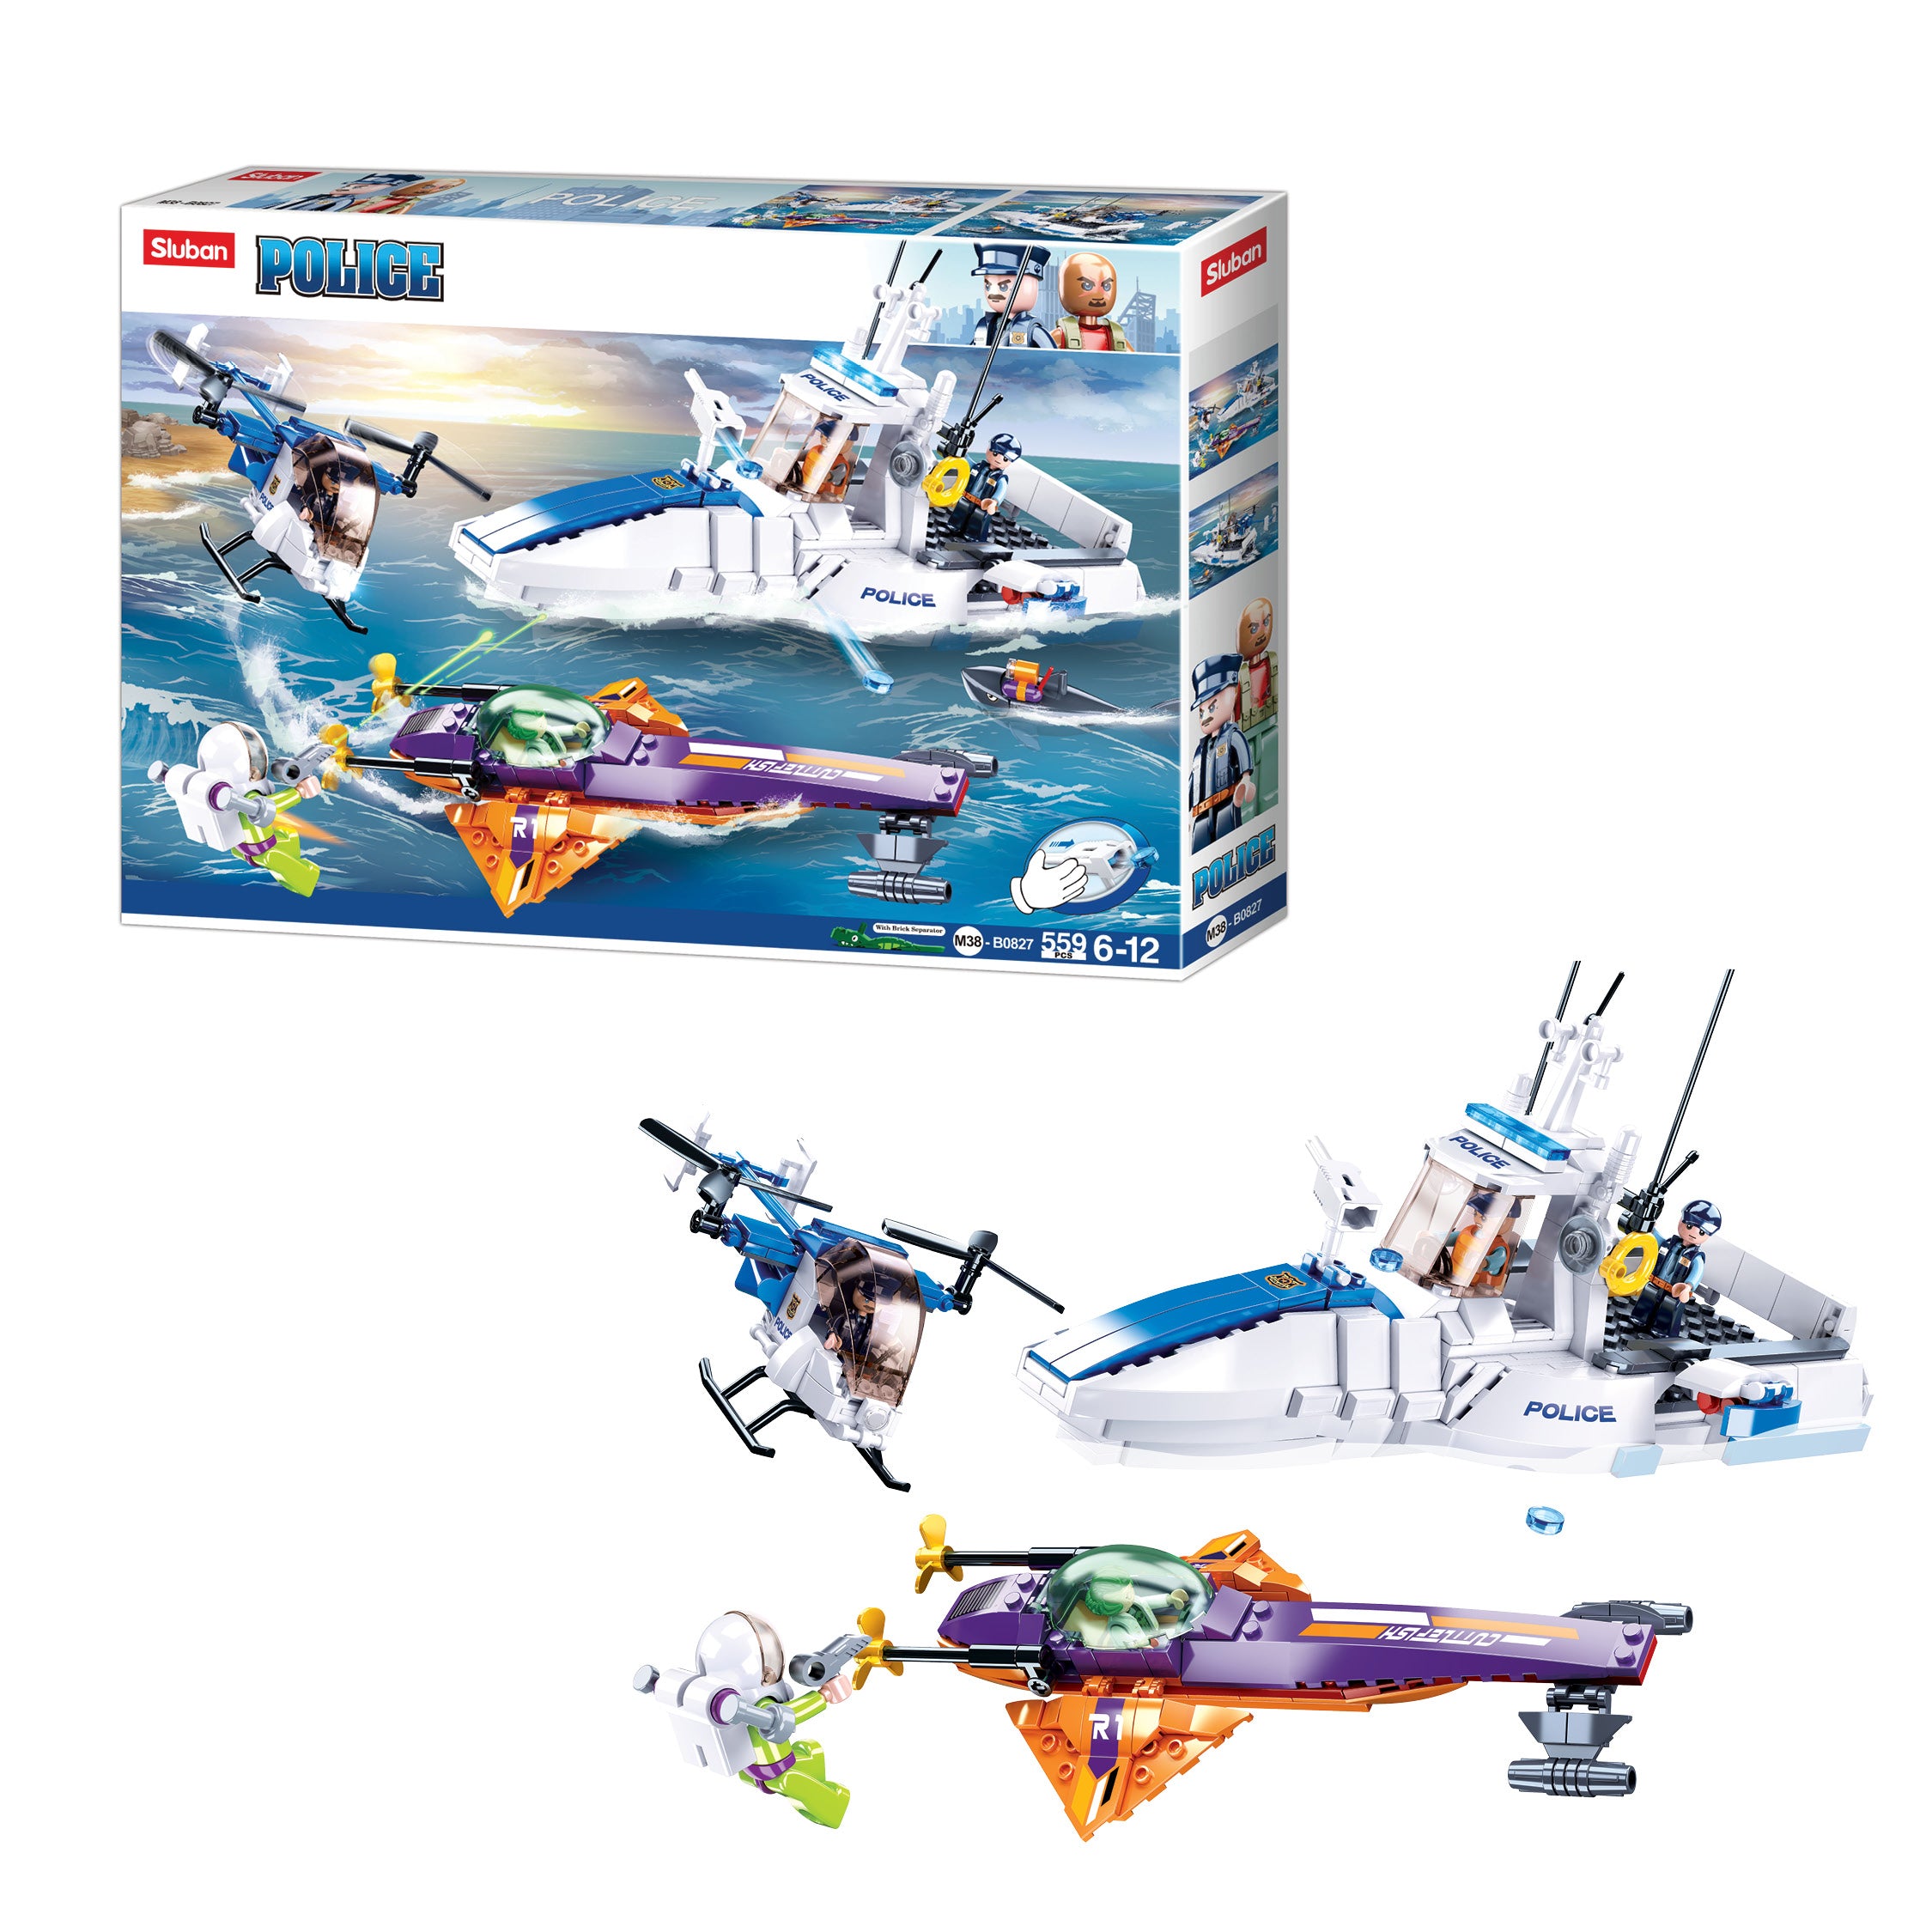 Sluban®  Manhunt In Sea (M38-B0827) (559 Pieces) Building Blocks Kit For Boys Aged 6 Years And Above Creative Construction Set Educational Stem Toy, Ideal For Gifting Birthday Gift Return Gift, Blocks Compatible With Other Leading Brands, Bis Certified.